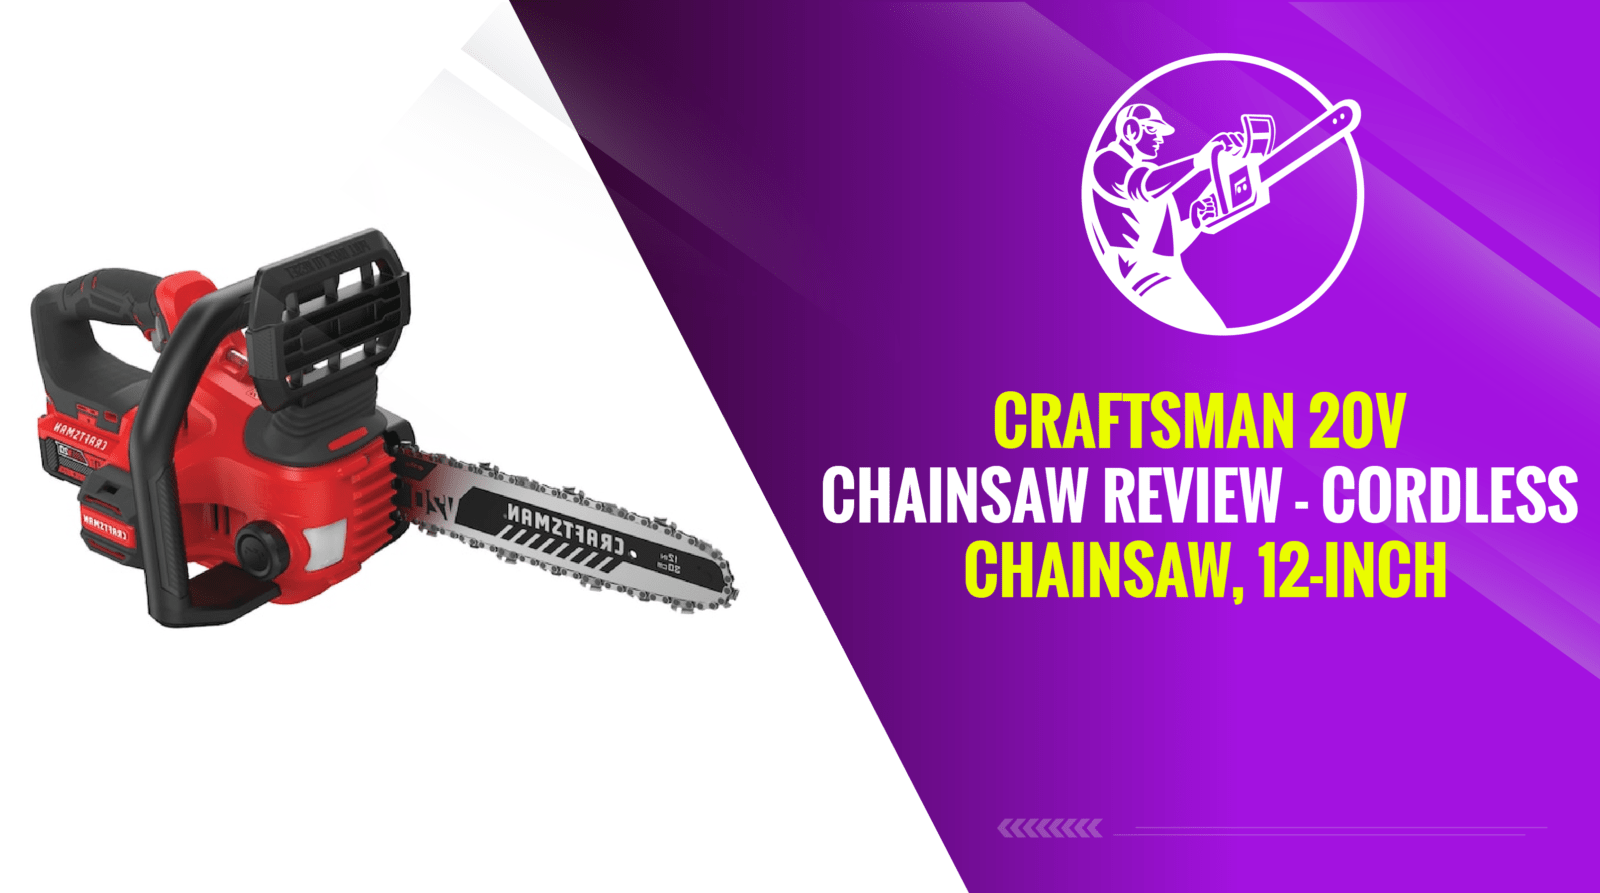 Craftsman 20v Chainsaw Review – Cordless Chainsaw, 12-Inch